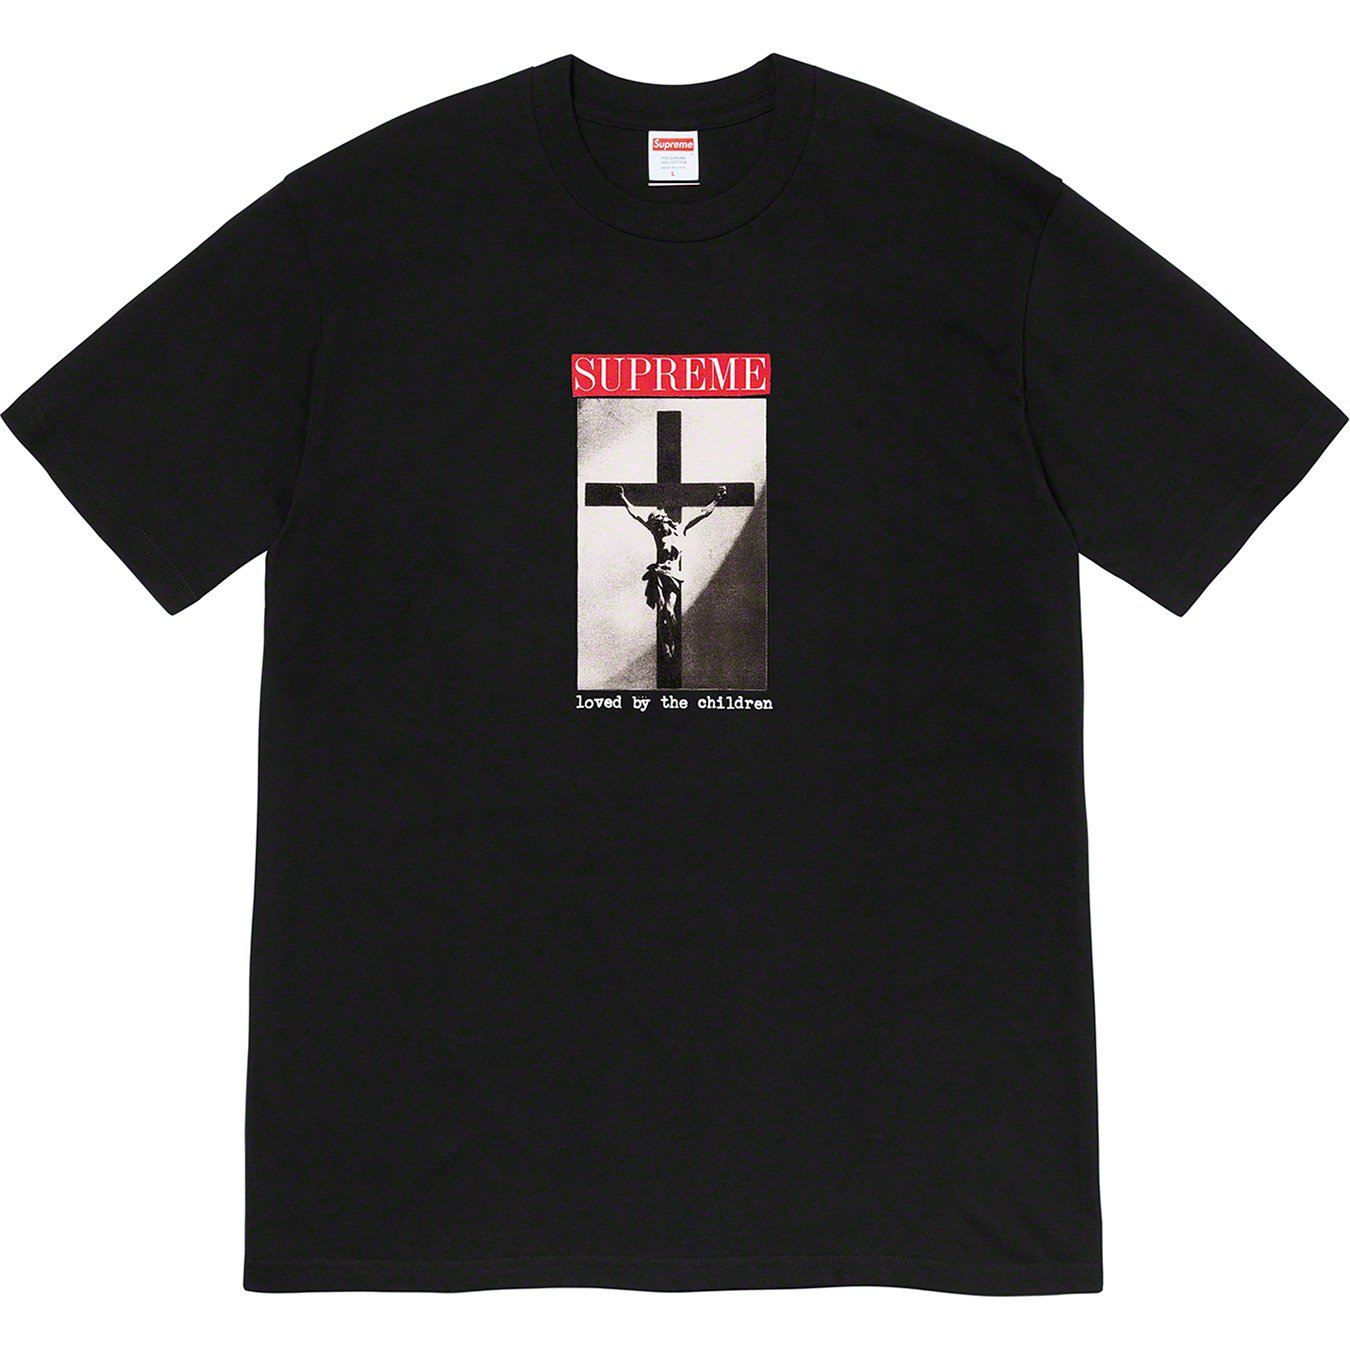 Loved By The Children Tee - spring summer 2020 - Supreme